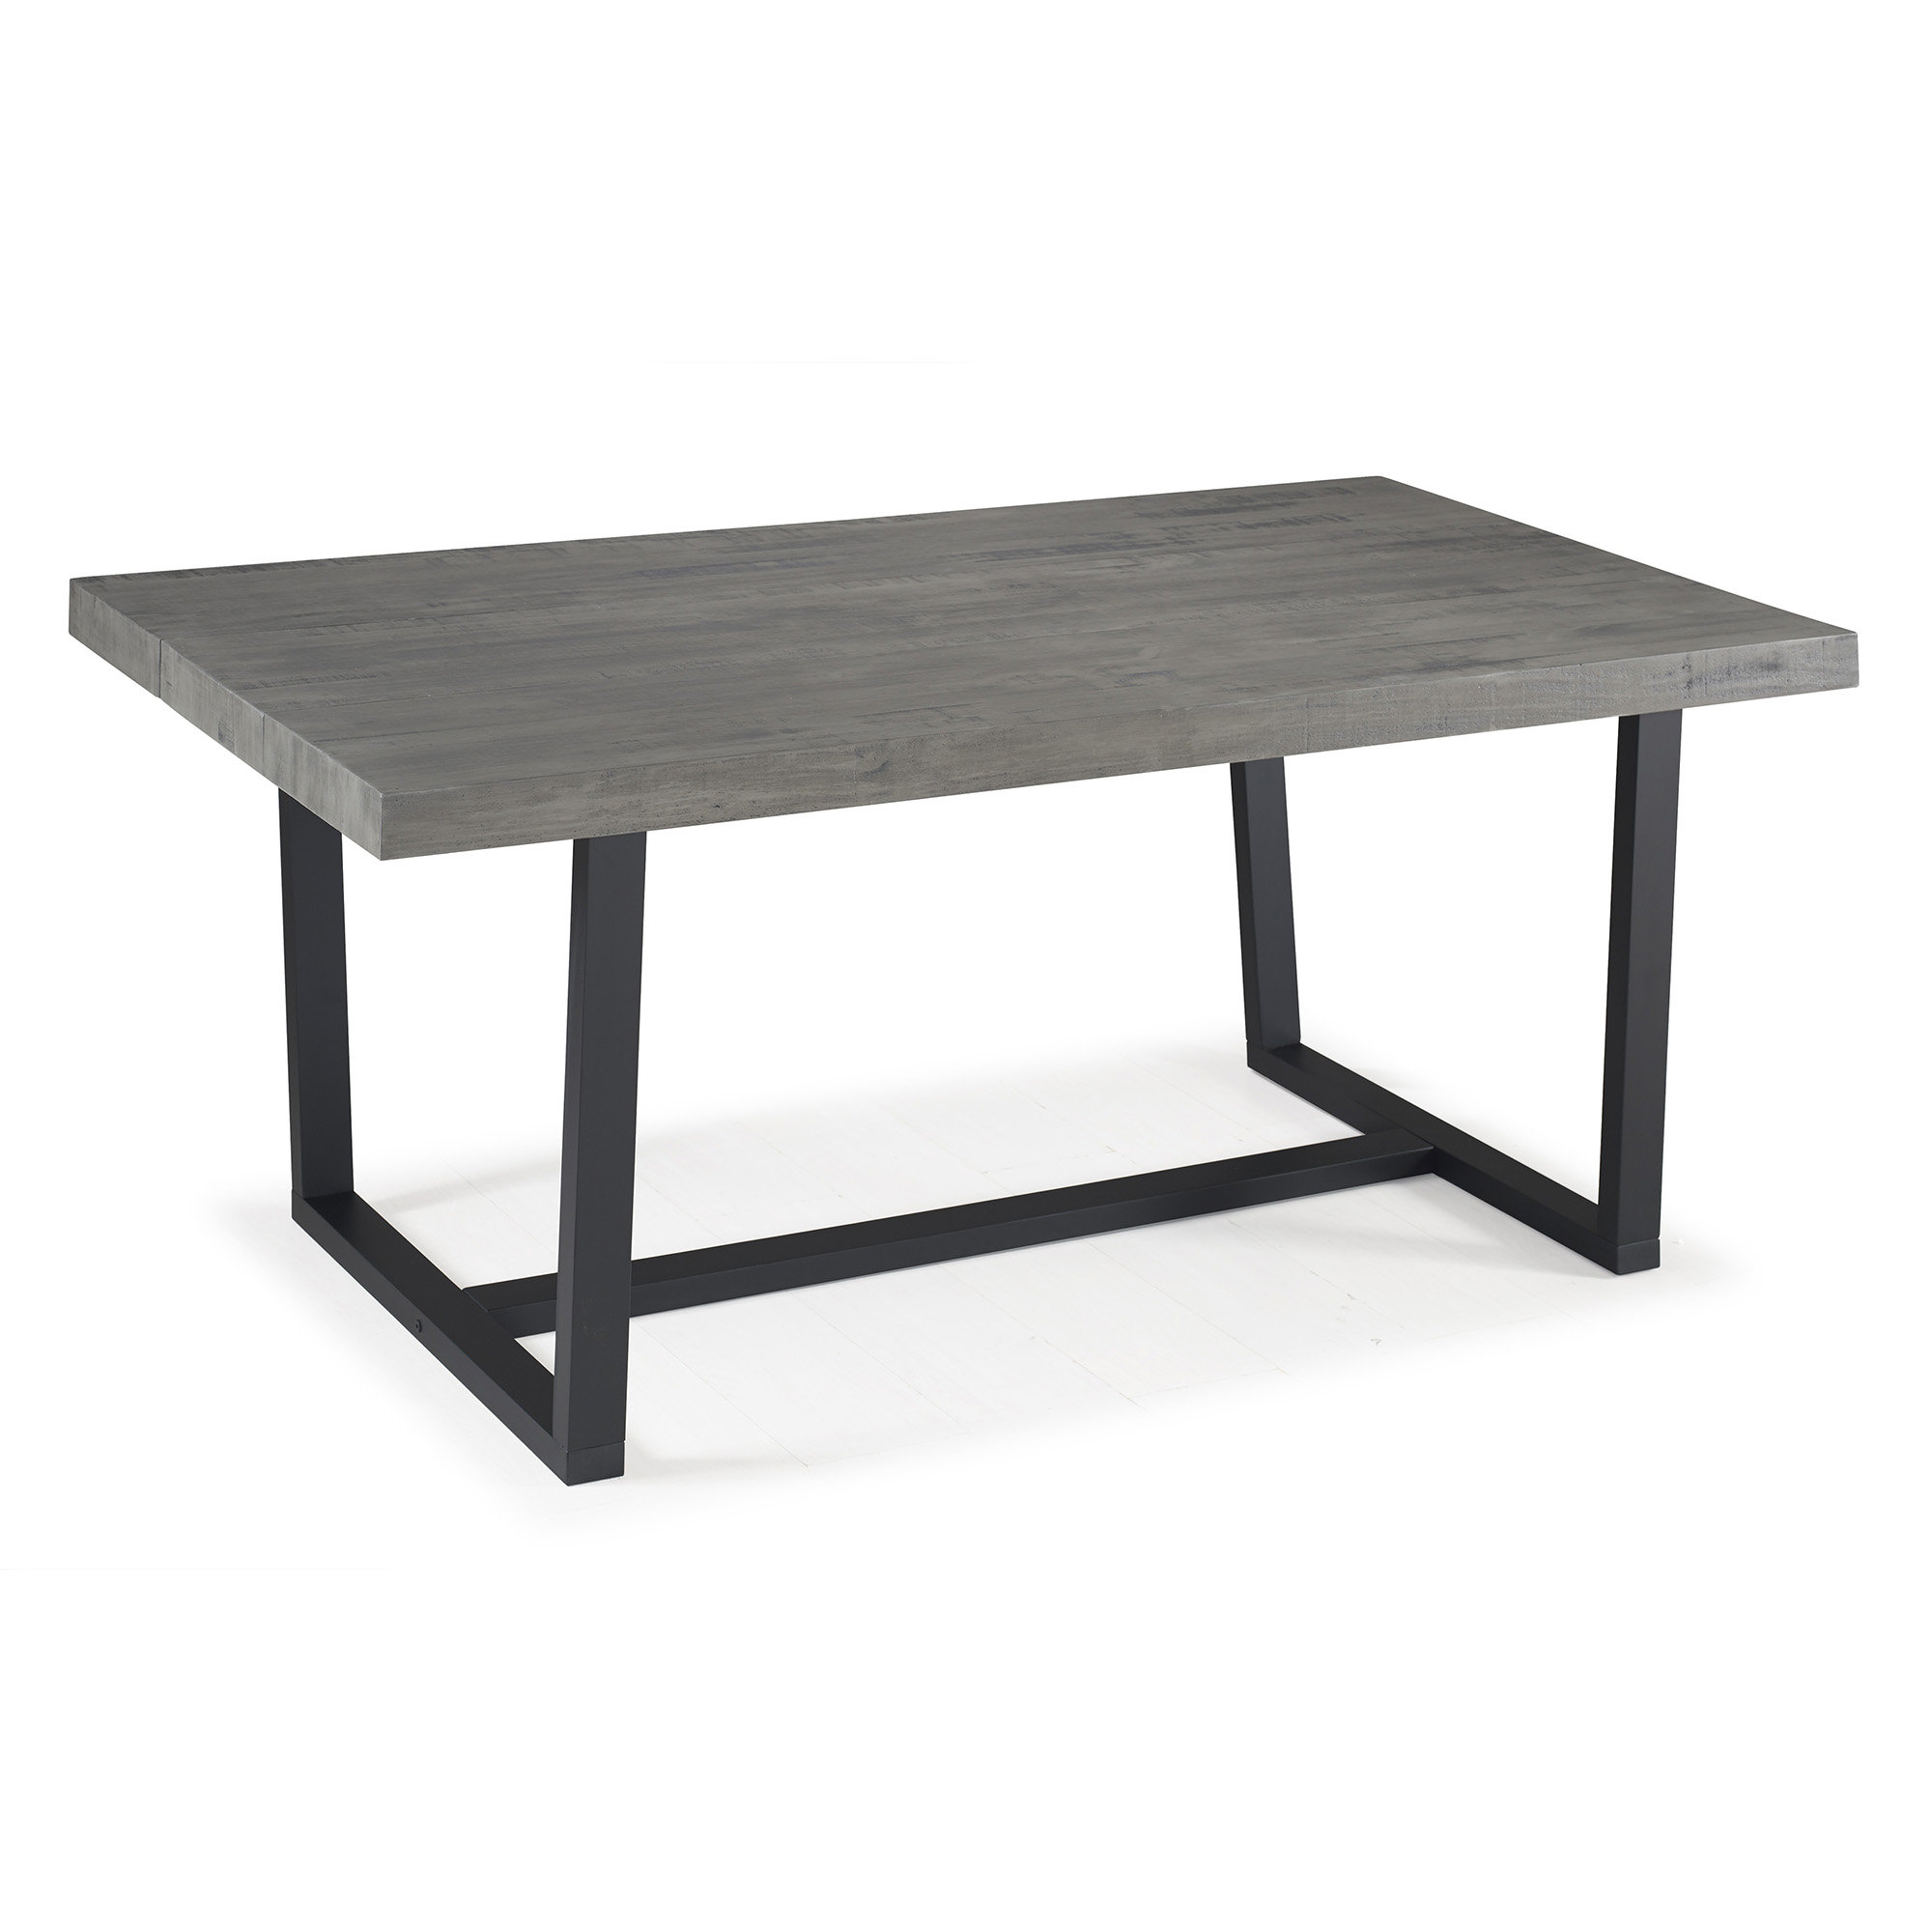 Union Rustic Neely Distressed Solid Wood Dining Table Reviews